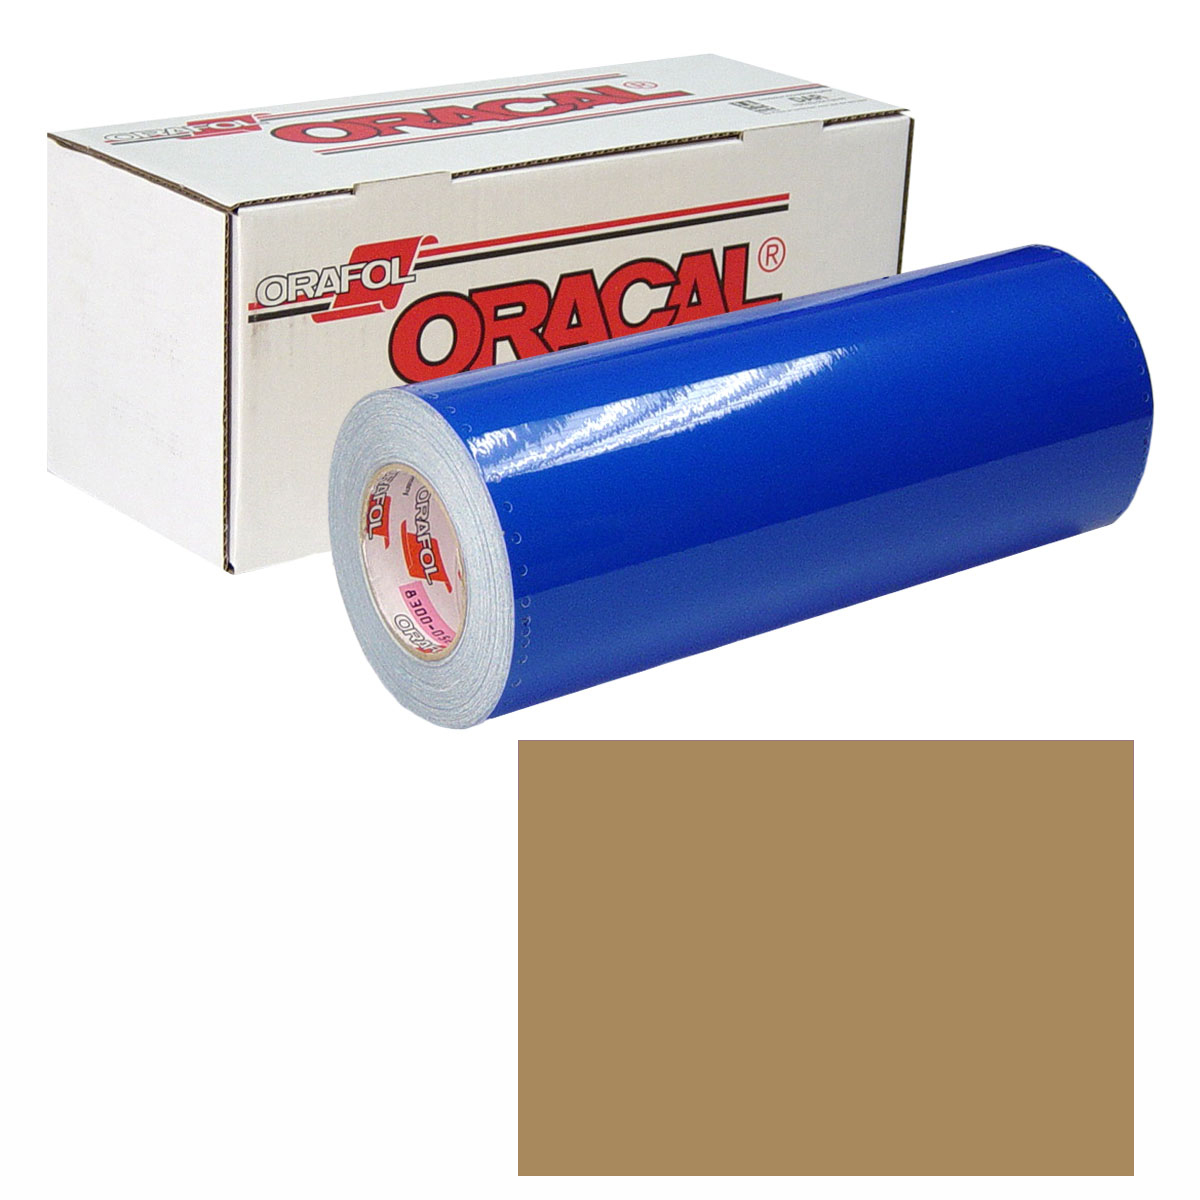 ORACAL 631 30in X 10yd 081 Light Brown